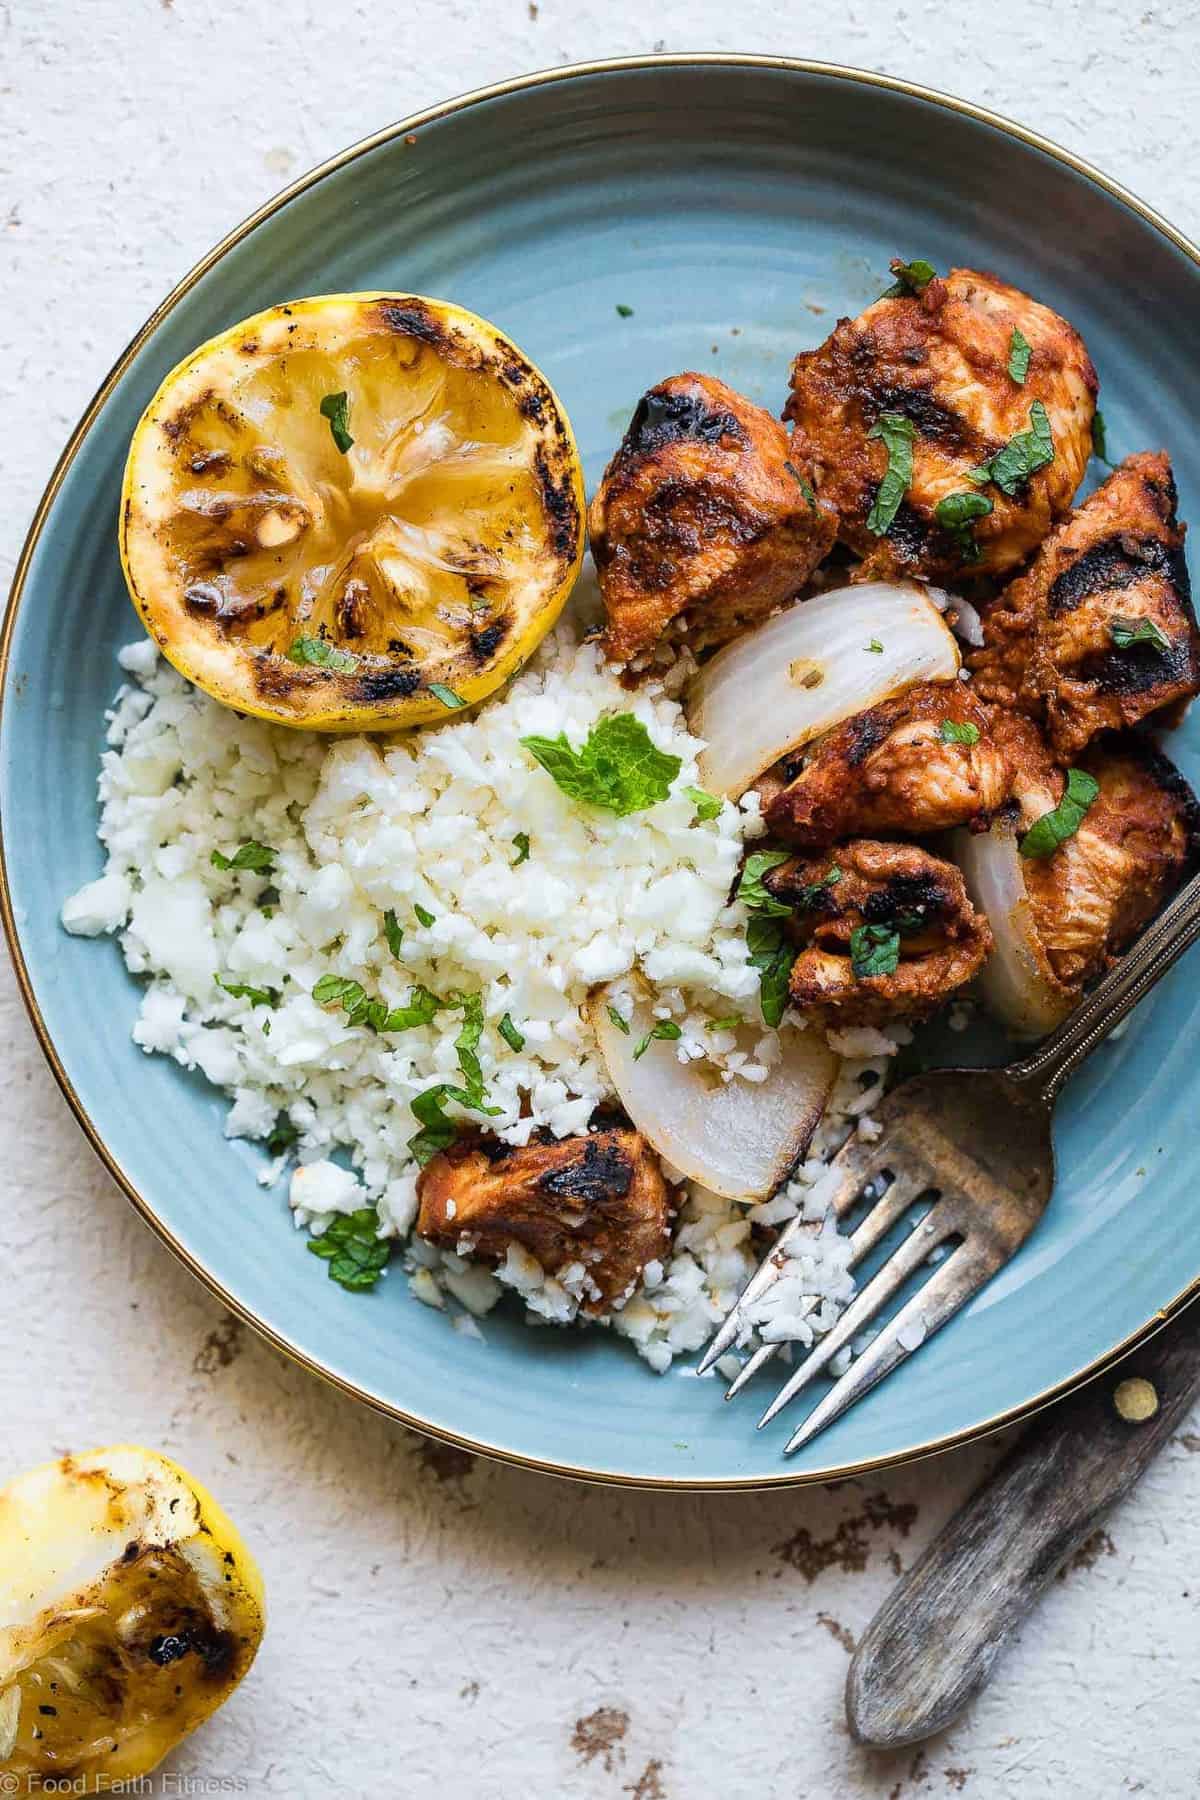 Tomato Grilled Moroccan Chicken Kebabs - These quick and easy, low carb Grilled Moroccan Chicken skewers are complete with a healthy, high protein yogurt mint sauce! Gluten free, only 1 Weight Watchers Freestlye point and SO delicious! | #Foodfaithfitness | #Lowcarb #WeightWatchers #Glutenfree #Healthy #Grilling